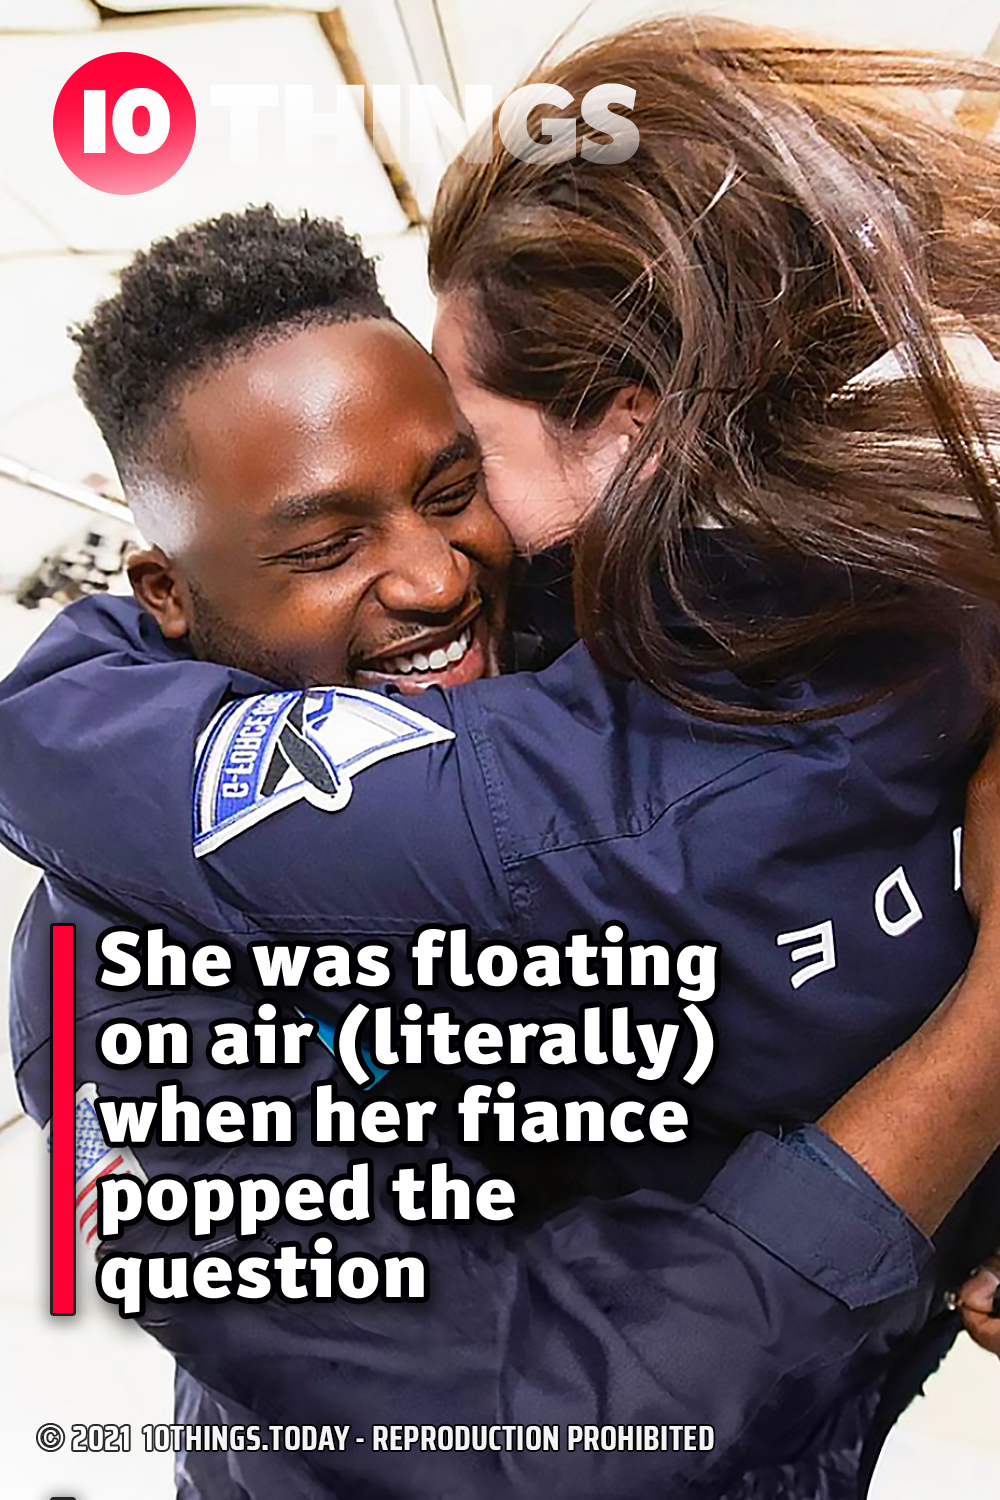 She was floating on air (literally) when her fiance popped the question